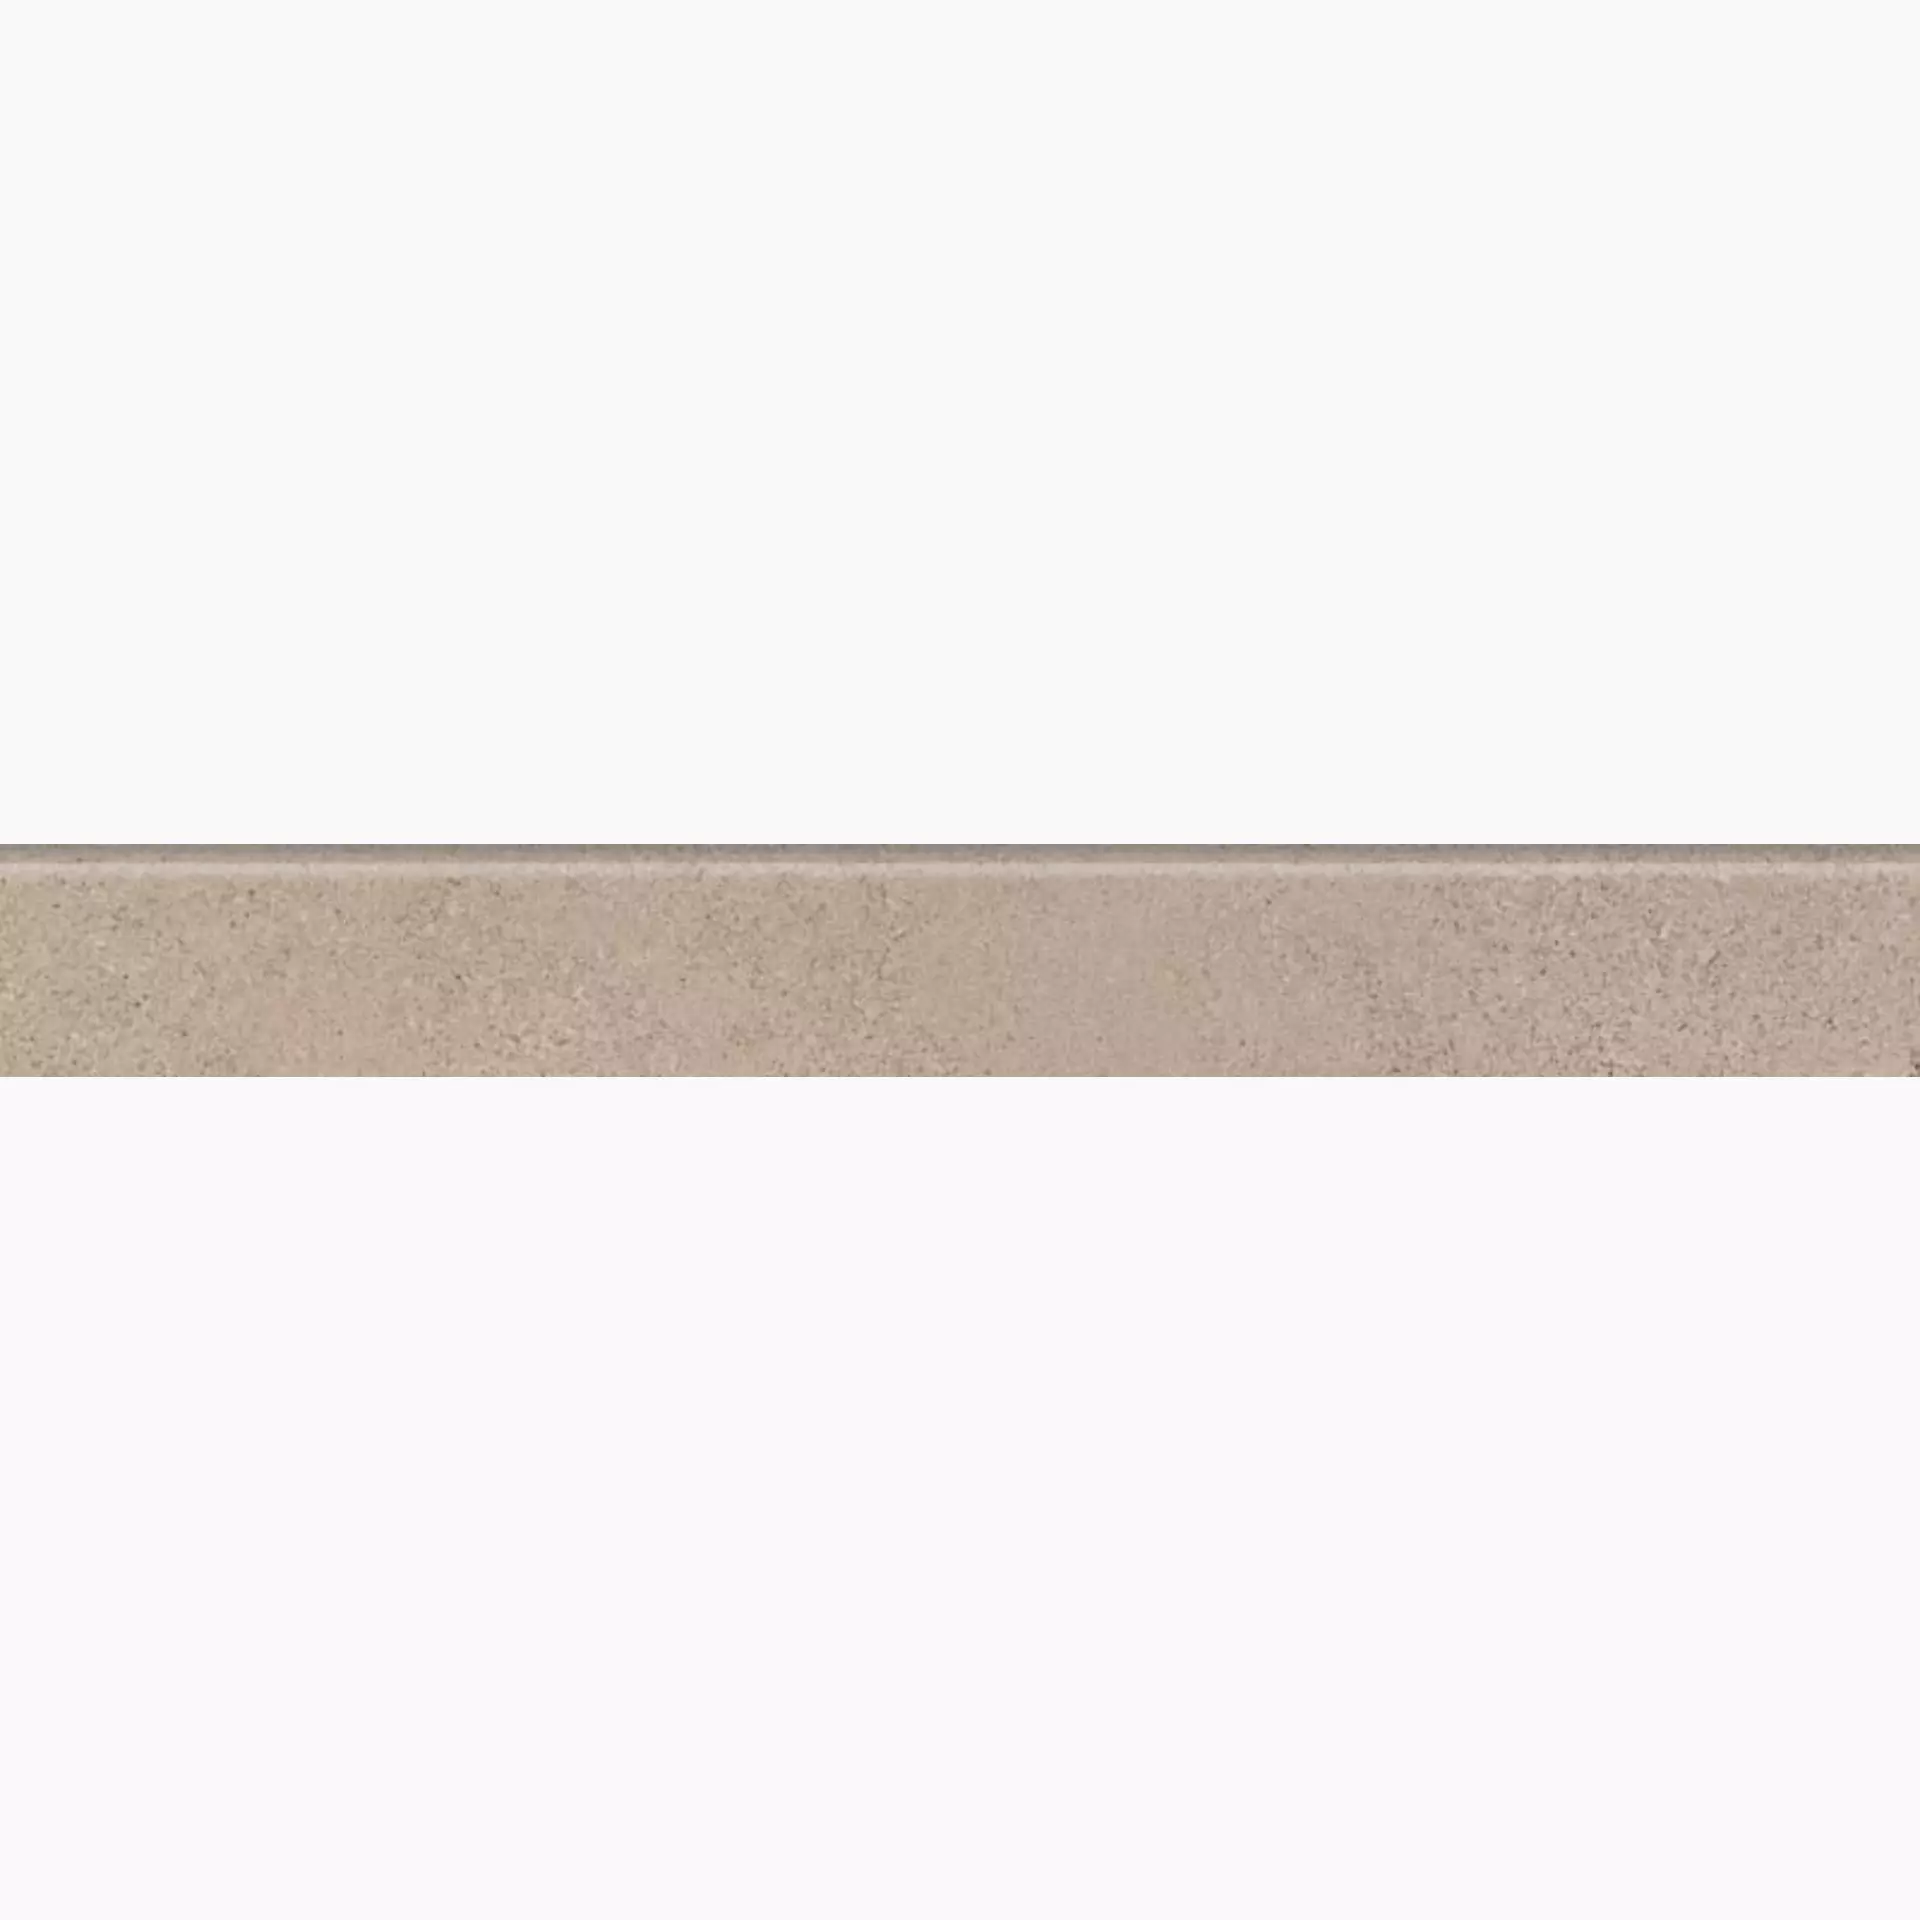 Sant Agostino Silkystone Taupe Natural Skirting board CSABTSTA60 7,3x60cm rectified 10mm